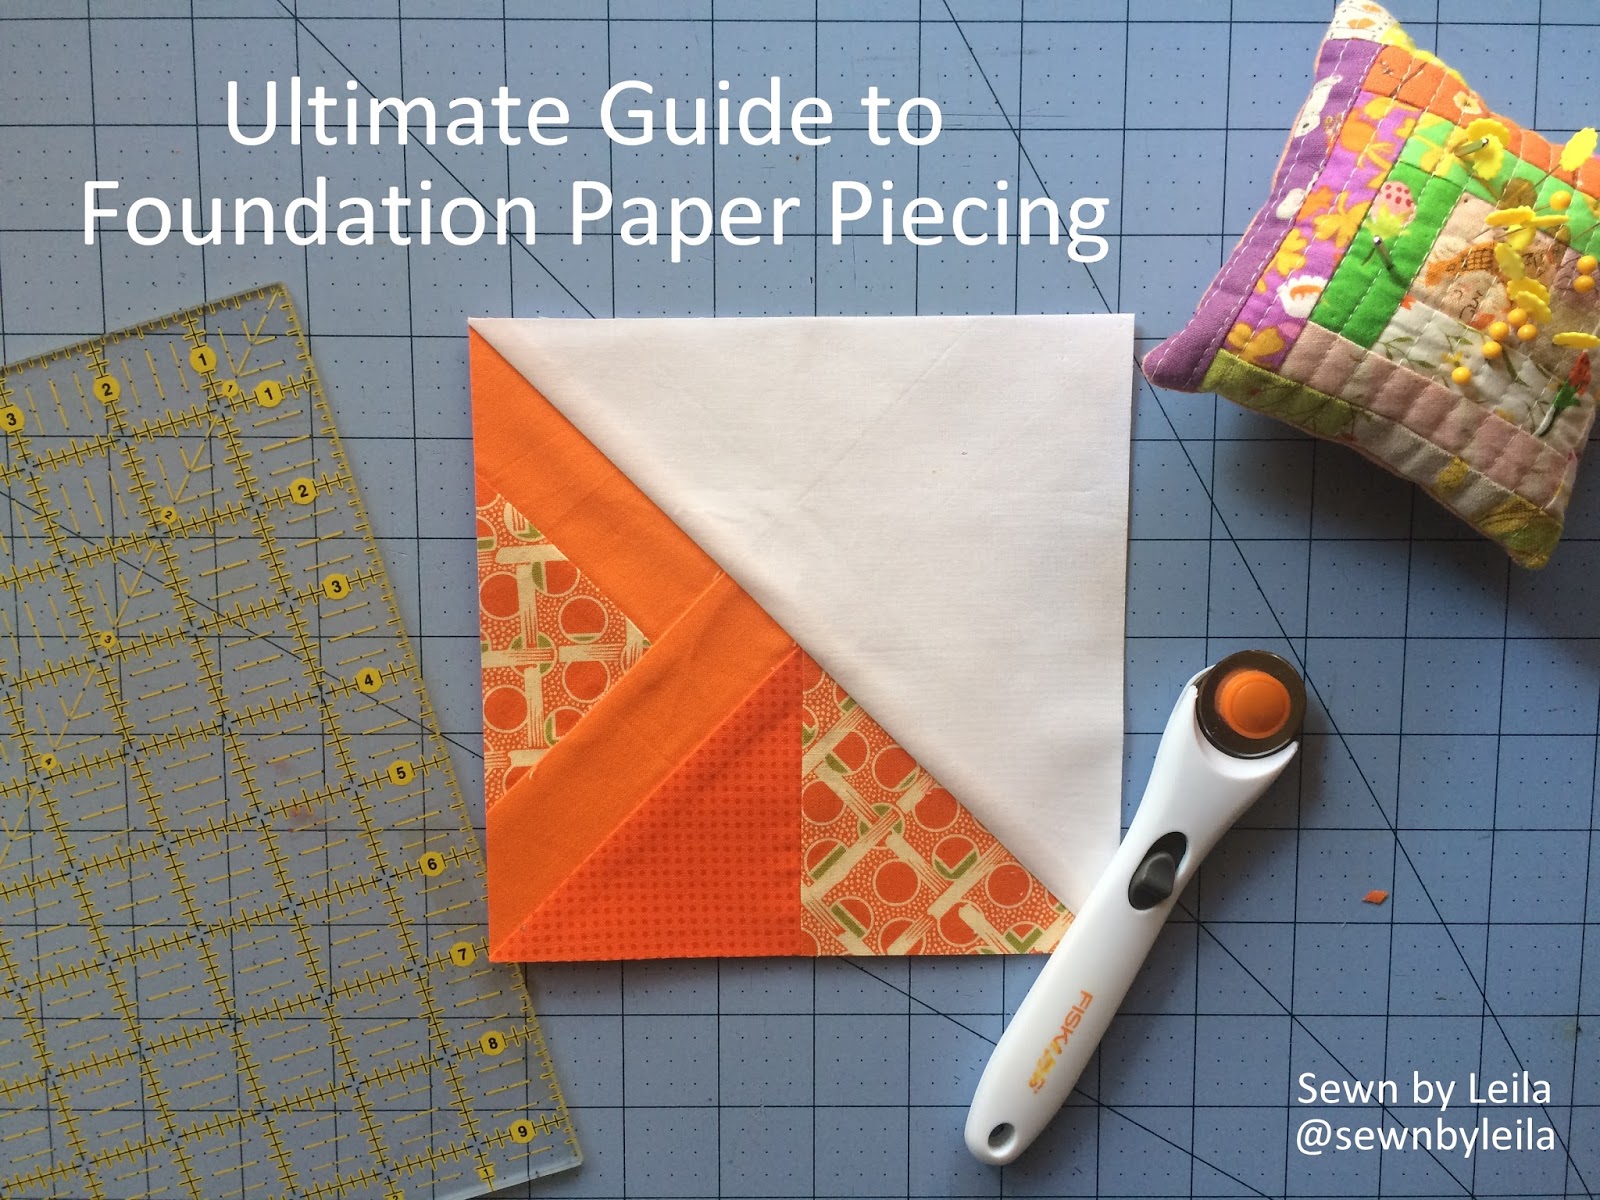 Foundation Piecing Paper That Patchwork Place by Martingale - 9781564772541  Quilting Notions